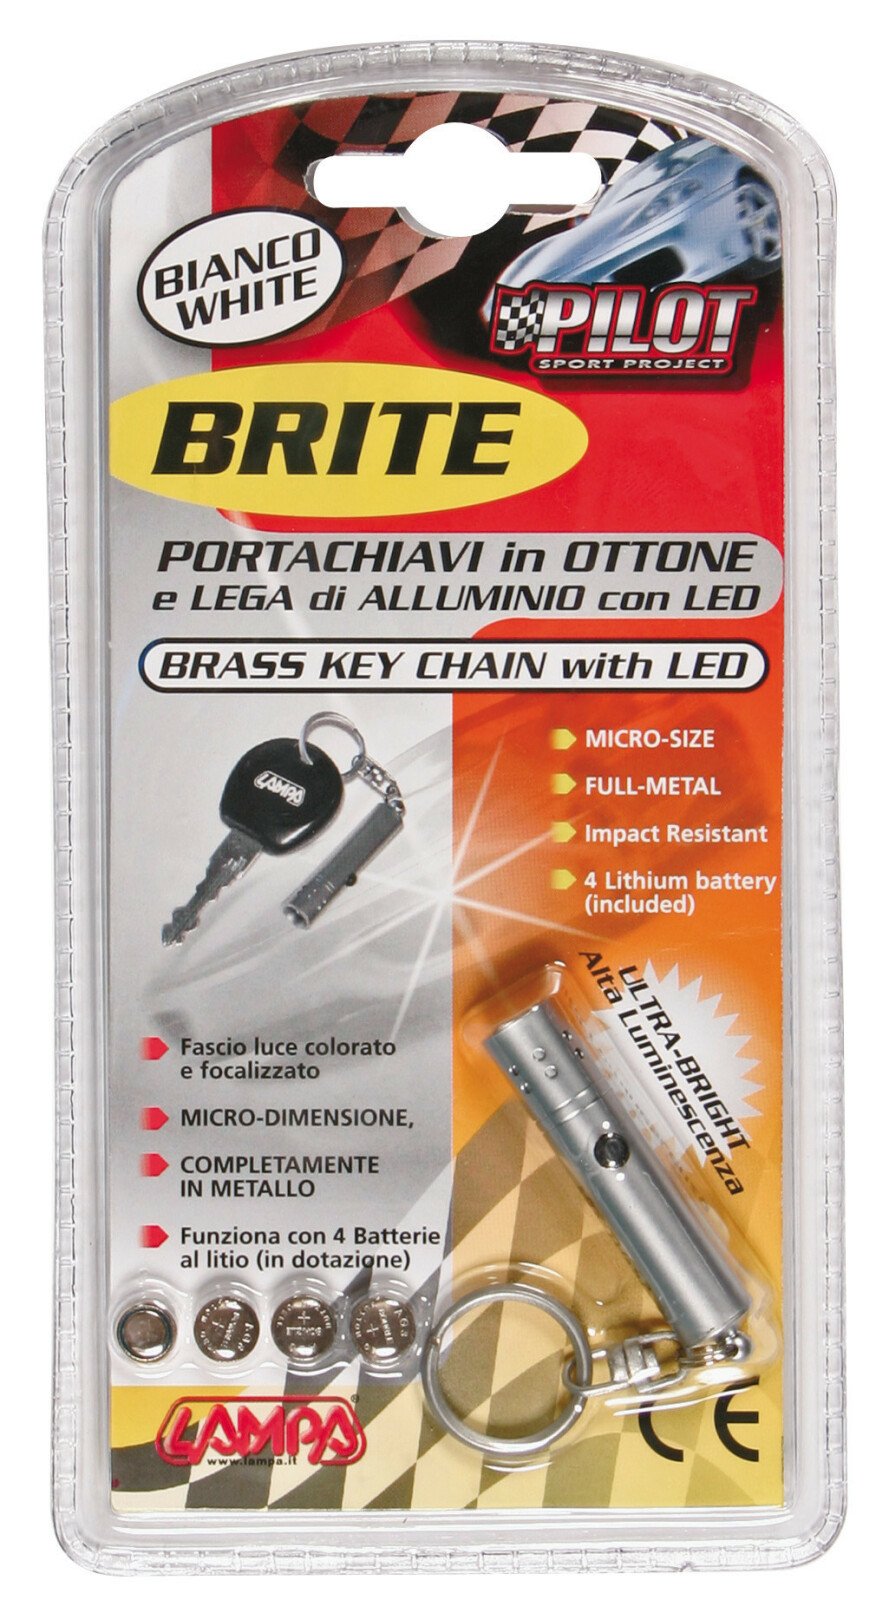 Brite, brass key ring with led - White thumb